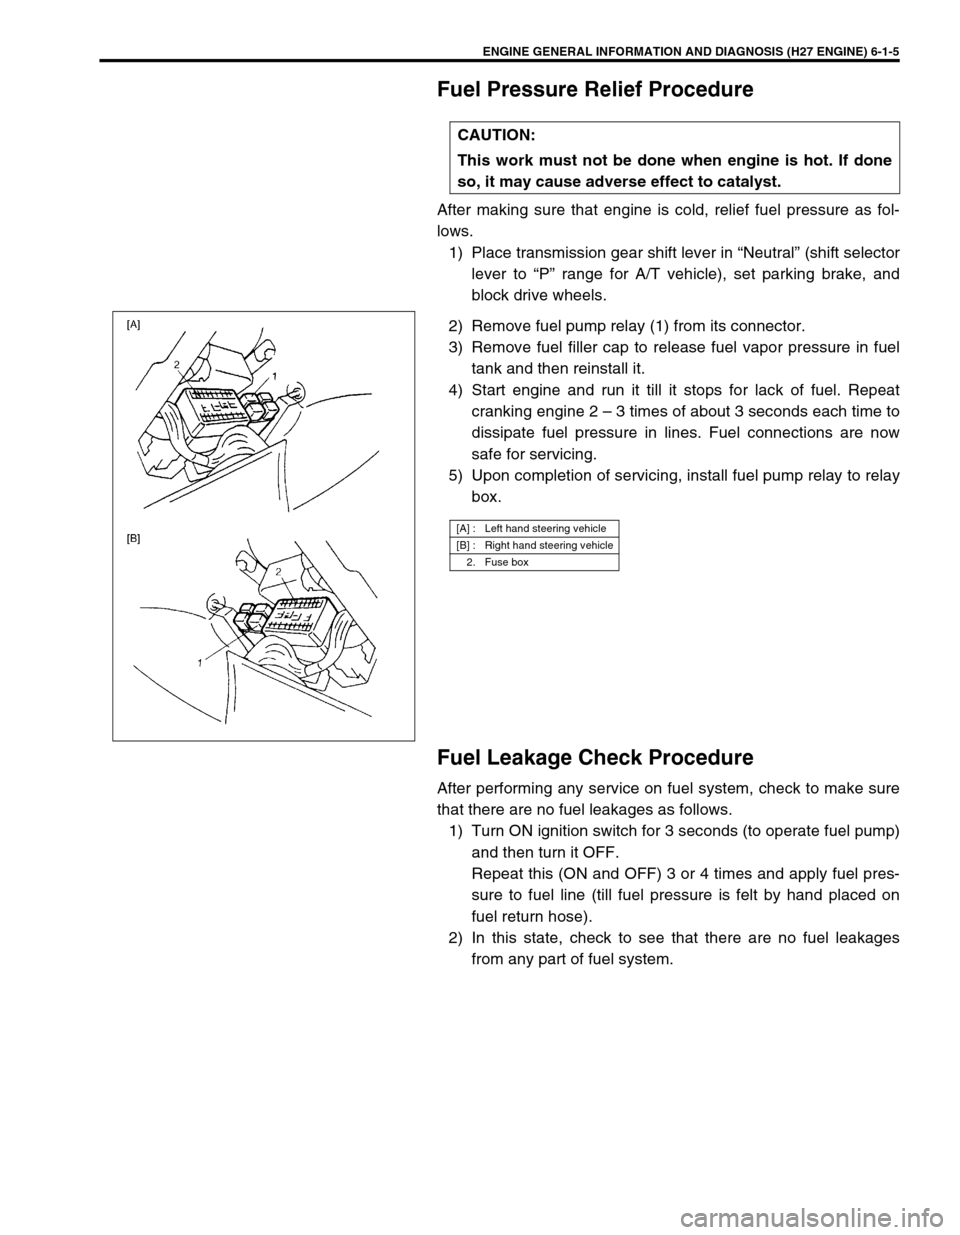 SUZUKI GRAND VITARA 2001 2.G Owners Manual ENGINE GENERAL INFORMATION AND DIAGNOSIS (H27 ENGINE) 6-1-5
Fuel Pressure Relief Procedure
After making sure that engine is cold, relief fuel pressure as fol-
lows.
1) Place transmission gear shift le